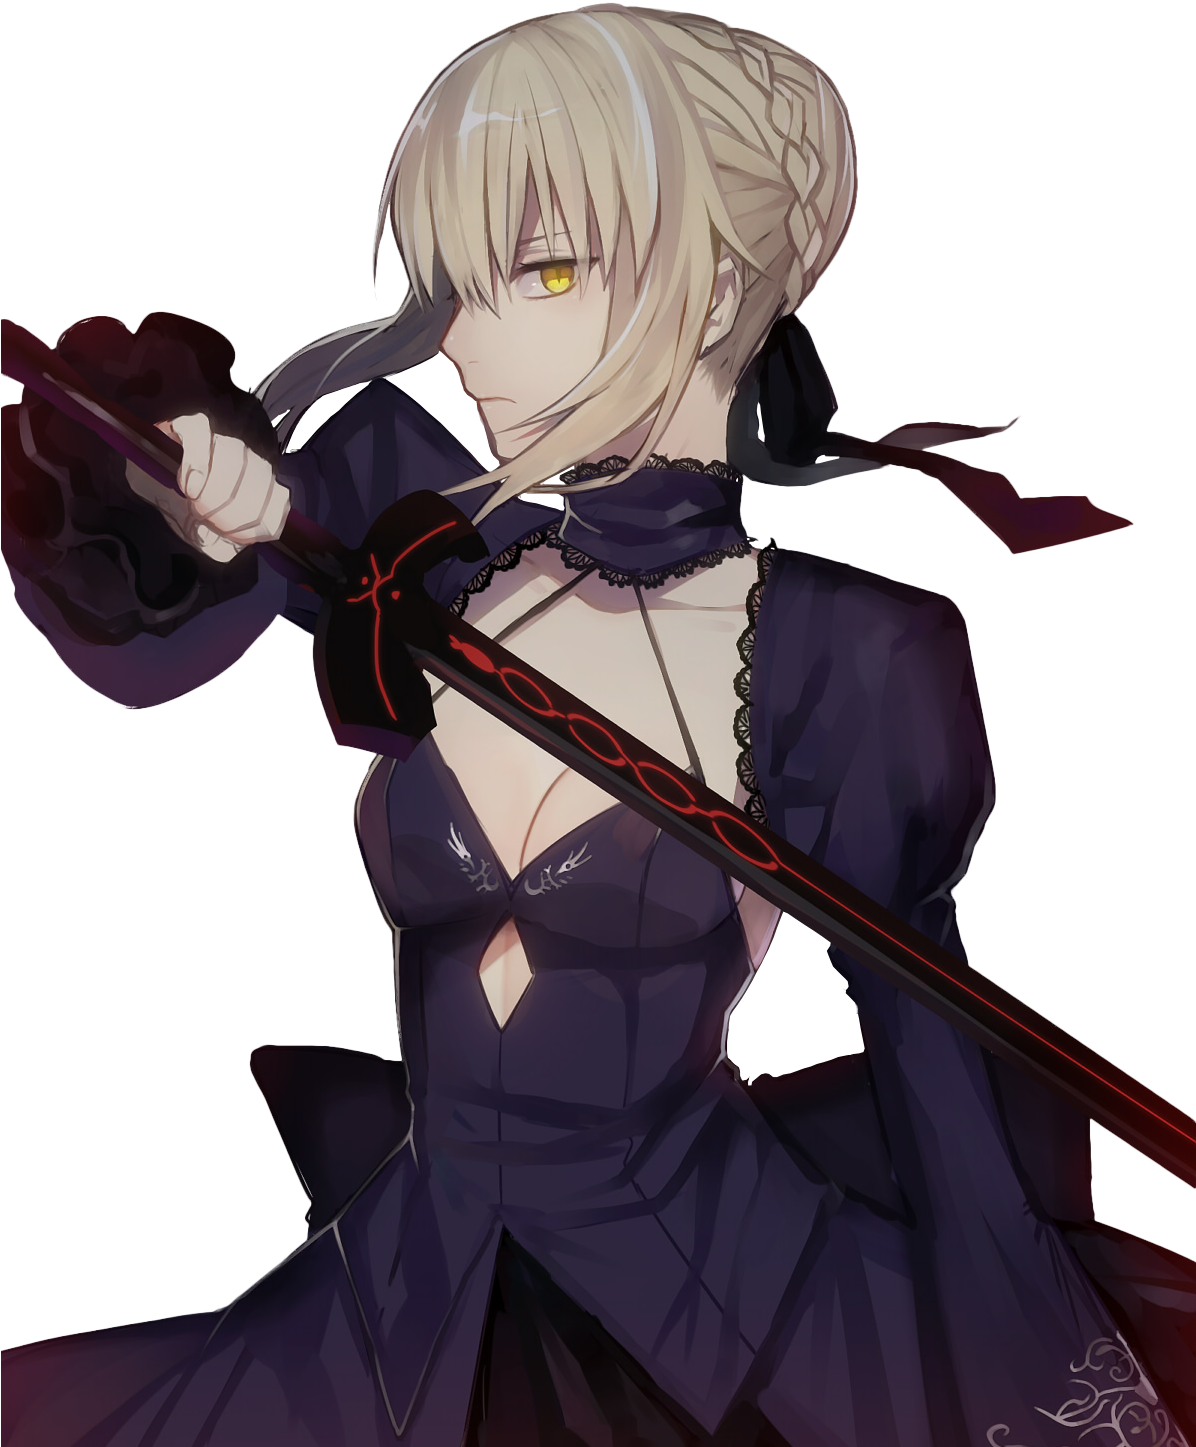 A Saber Alter Render Me And A Friend Made Clipart - Large Size Png ...